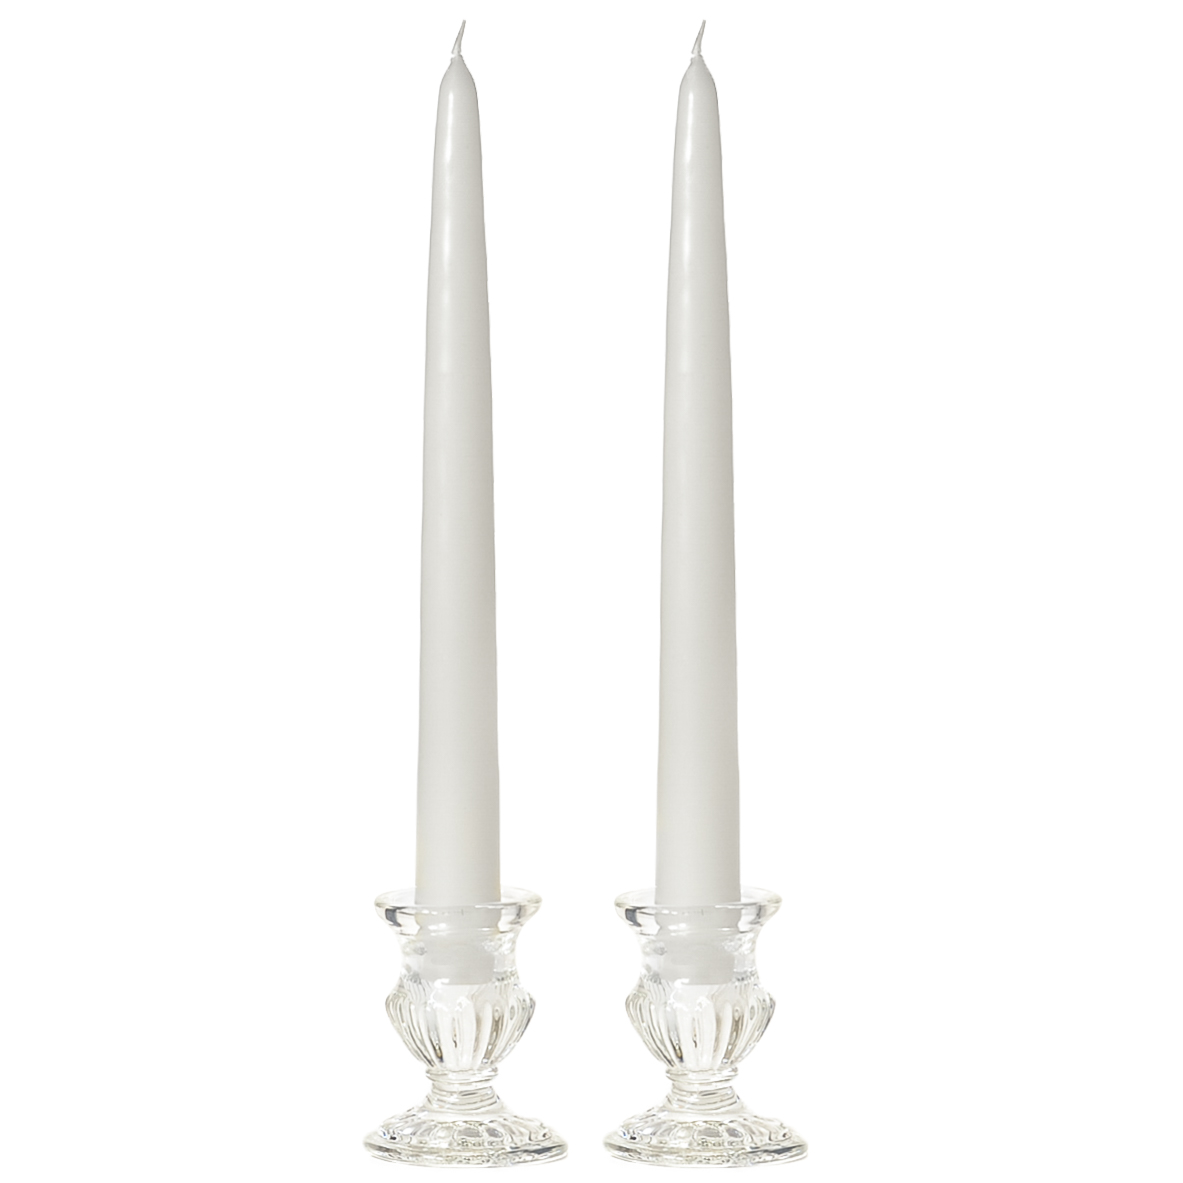 4 WHITE Taper Candles 200mm tall 